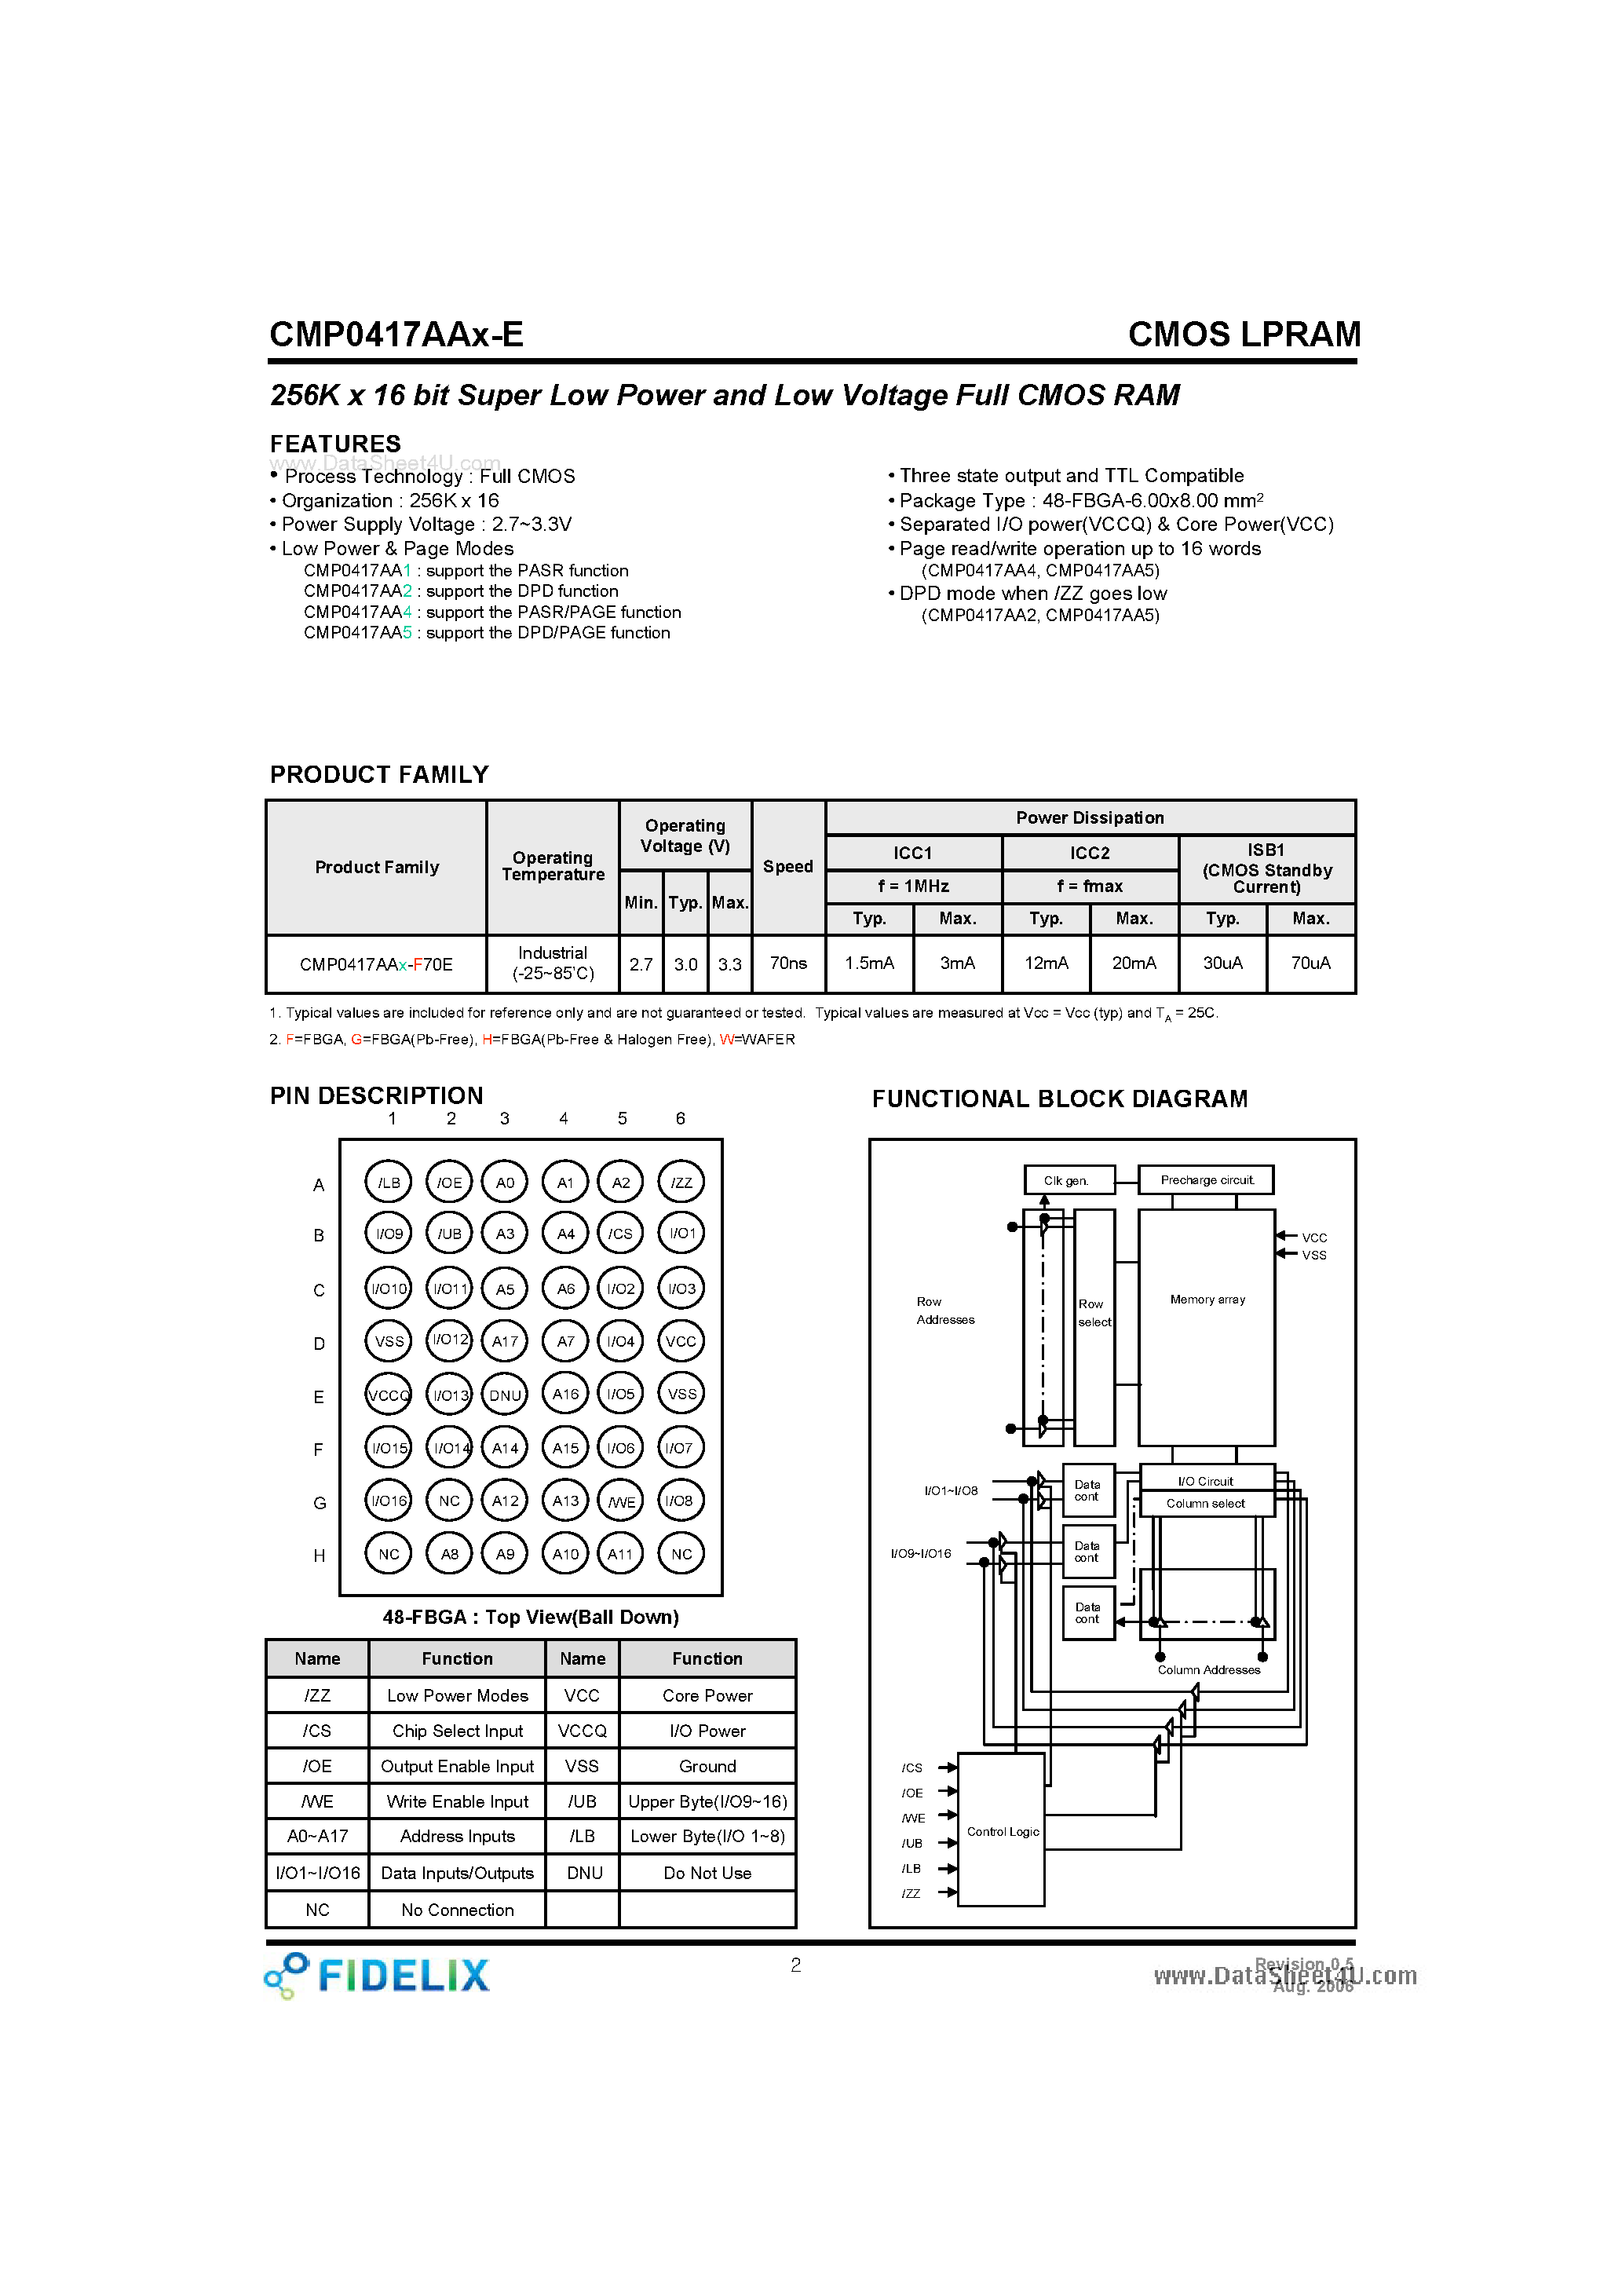 Datasheet CMP0417AAx-E - 256K x 16 bit Super Low Power and Low Voltage Full CMOS RAM page 2